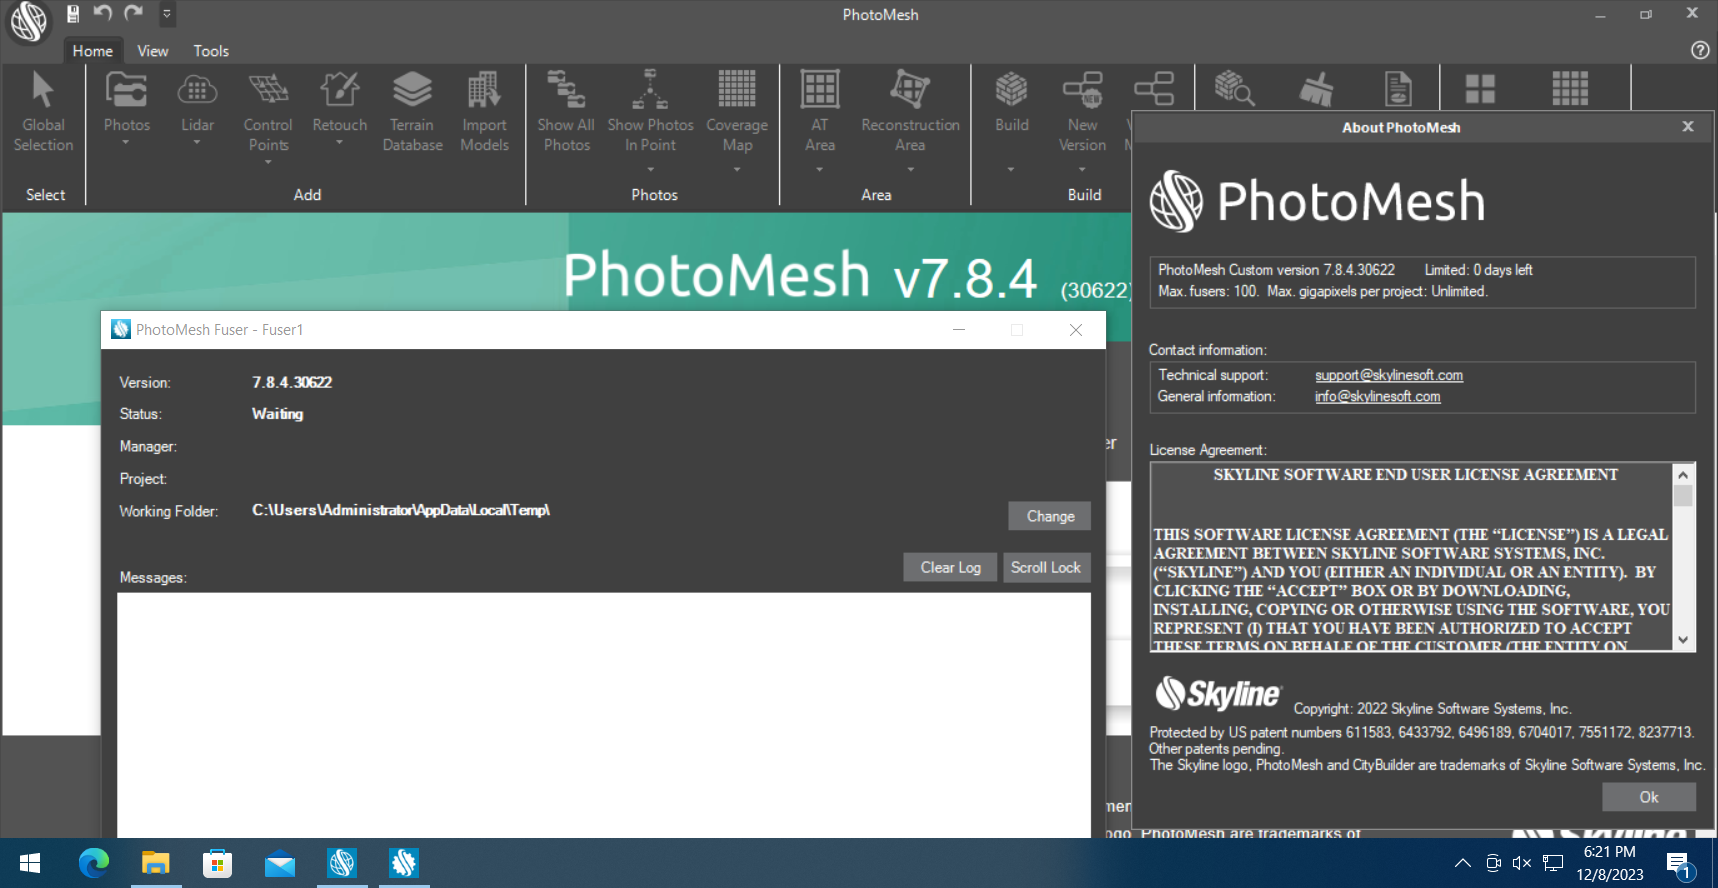 Working with Skyline PhotoMesh and PhotoMesh Fuser 7.8.4 full license